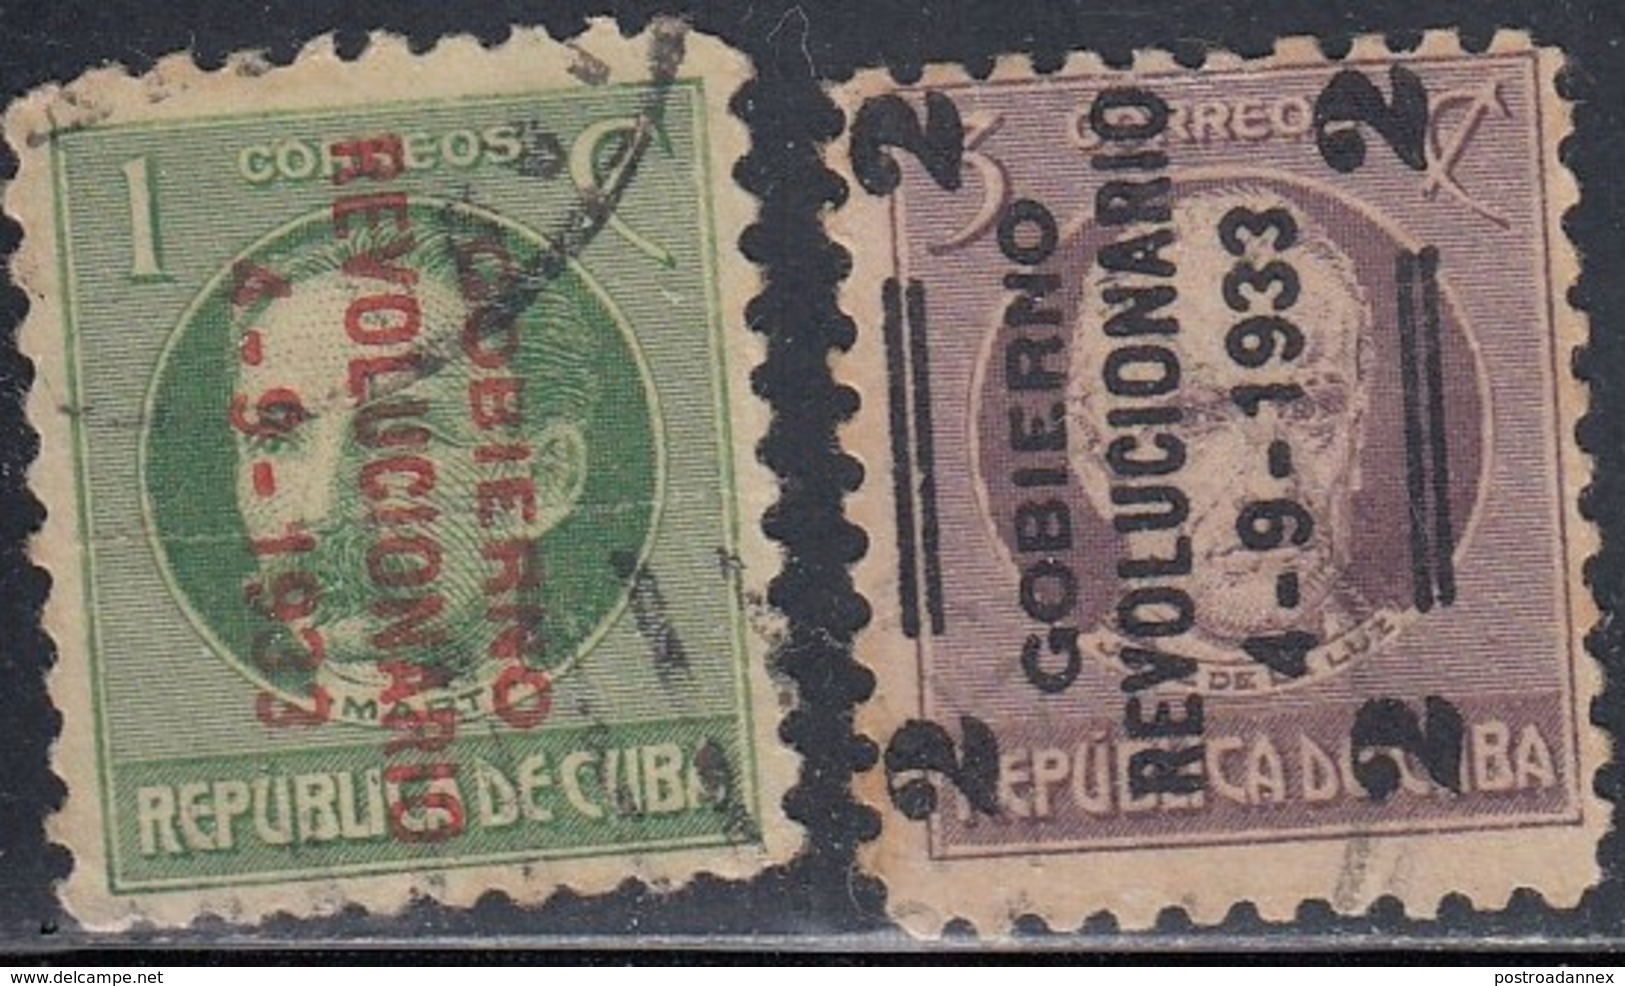 Cuba, Scott #317-318, Used, Marti Overprinted, Caballero Surcharged, Issued 1933 - Used Stamps